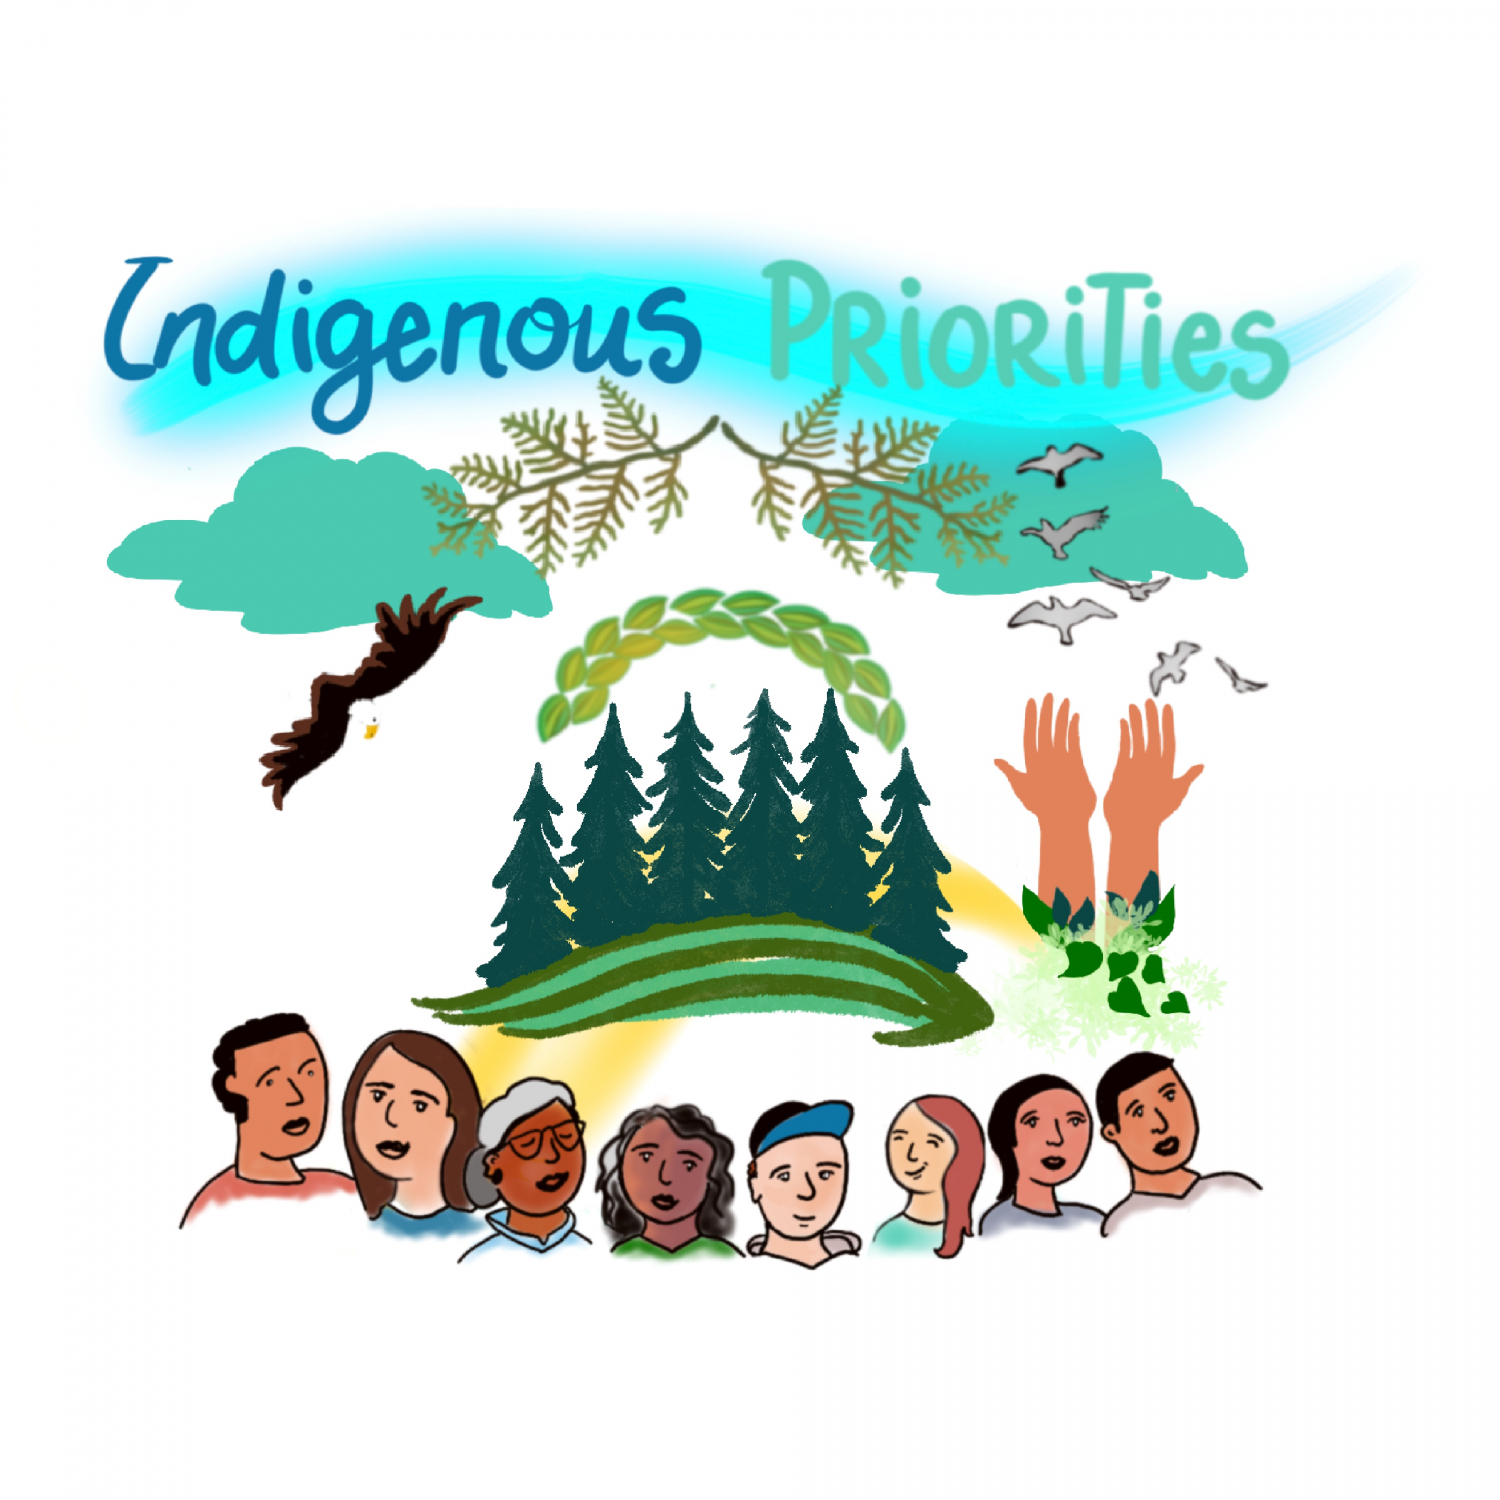 Illustration of a line of indigenous portraits with birds and trees with the text "Indigenous Priorities" 